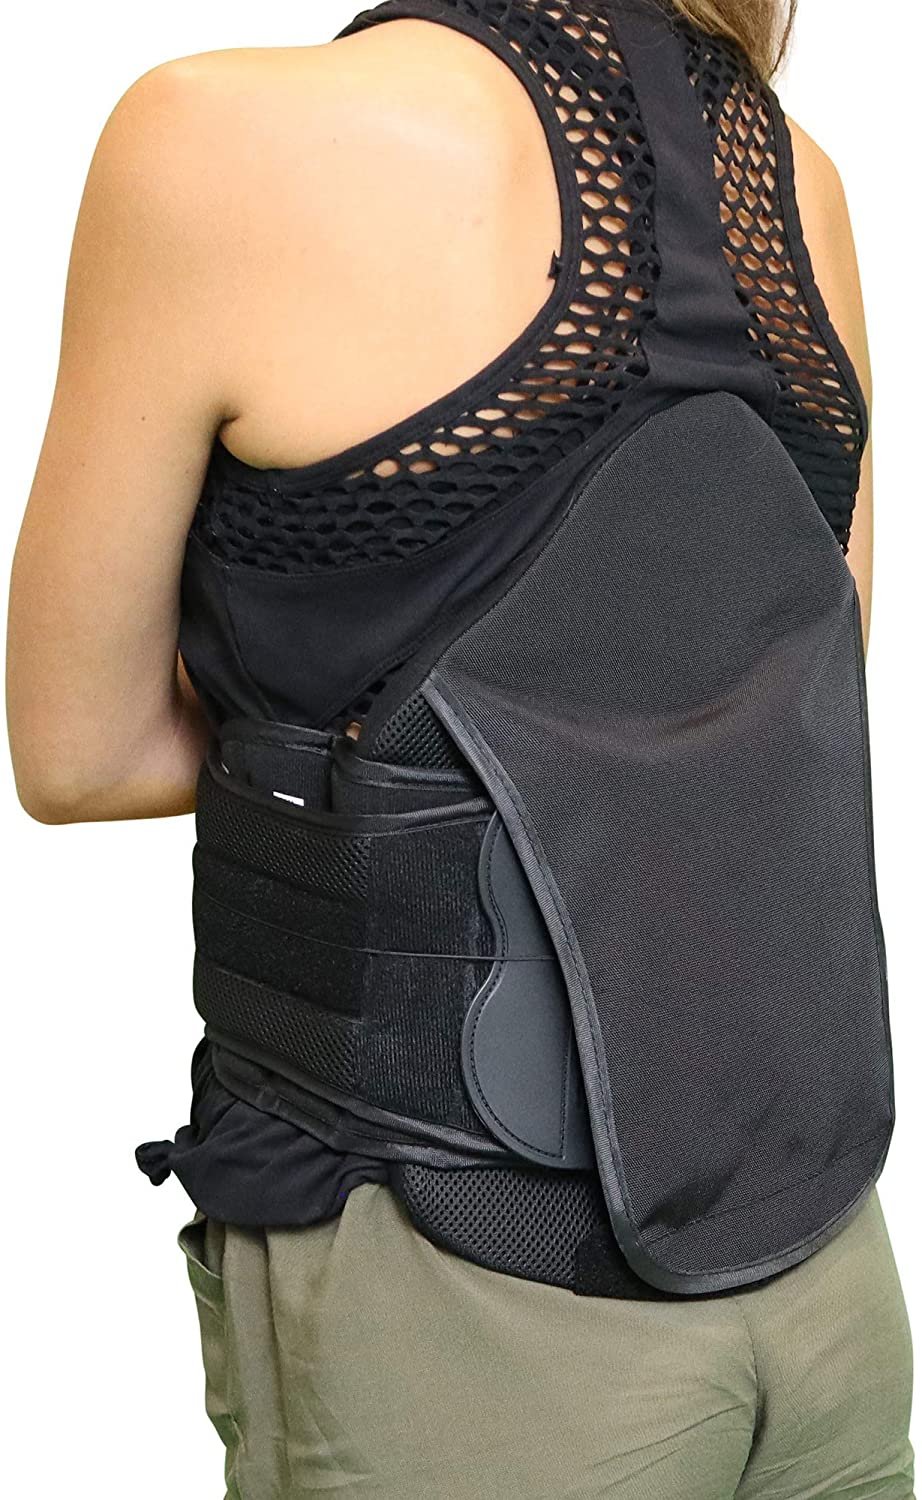 New Options Universal LSO Brace for Lower Back Pain. Spinal